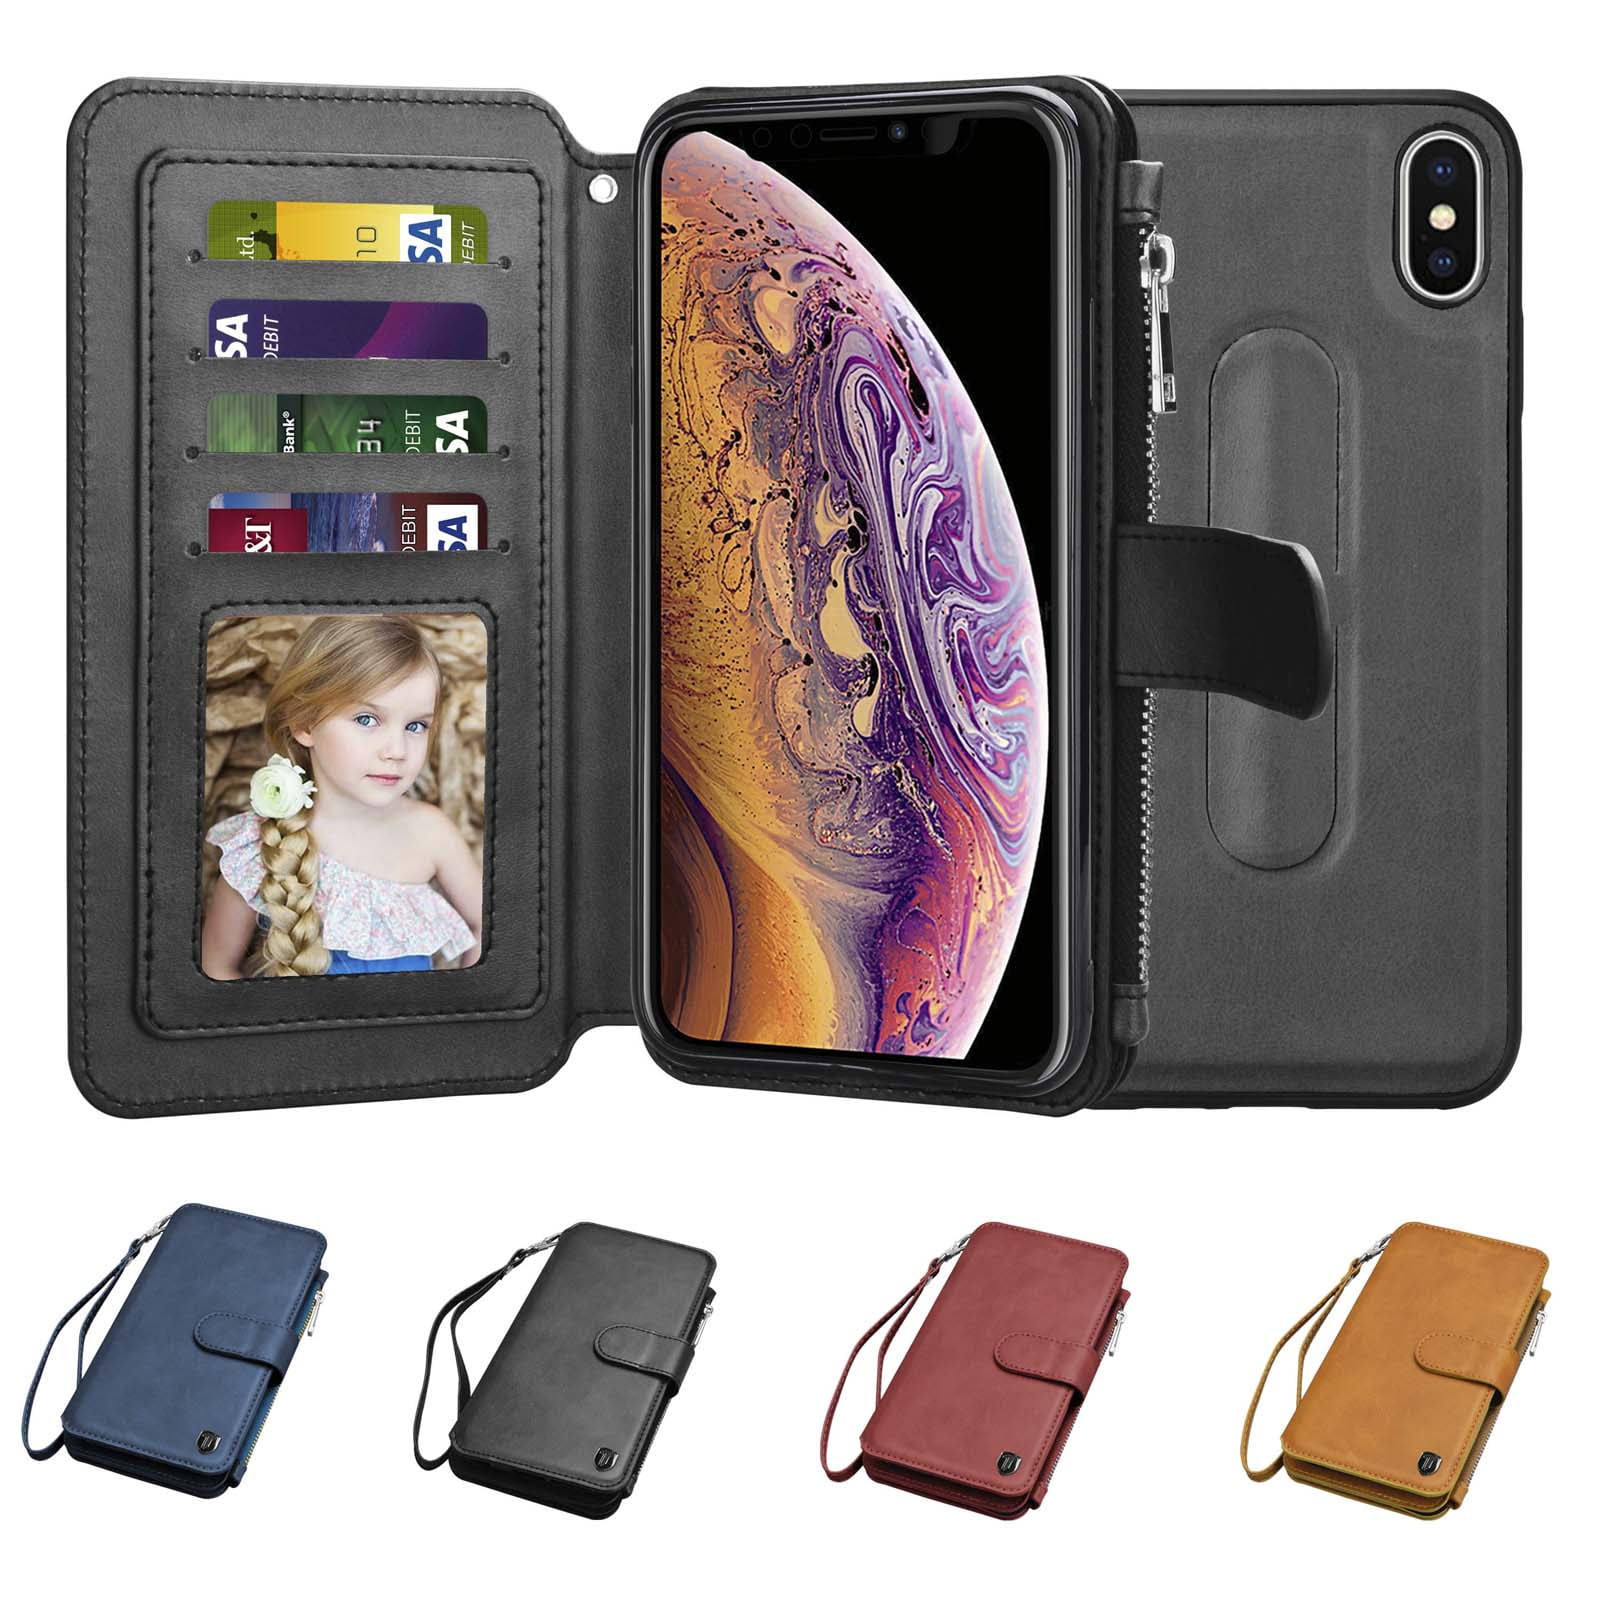 Relief Design Bookstyle Leather Wallet Holster Kickstand Function Full Body Protection Bumper Magnetic Closure Flip Cover with Wrist Lanyard and Screen Protector For iphone X Case with Card Slot,OYIME Colorful Painting Pattern Marble Mandala